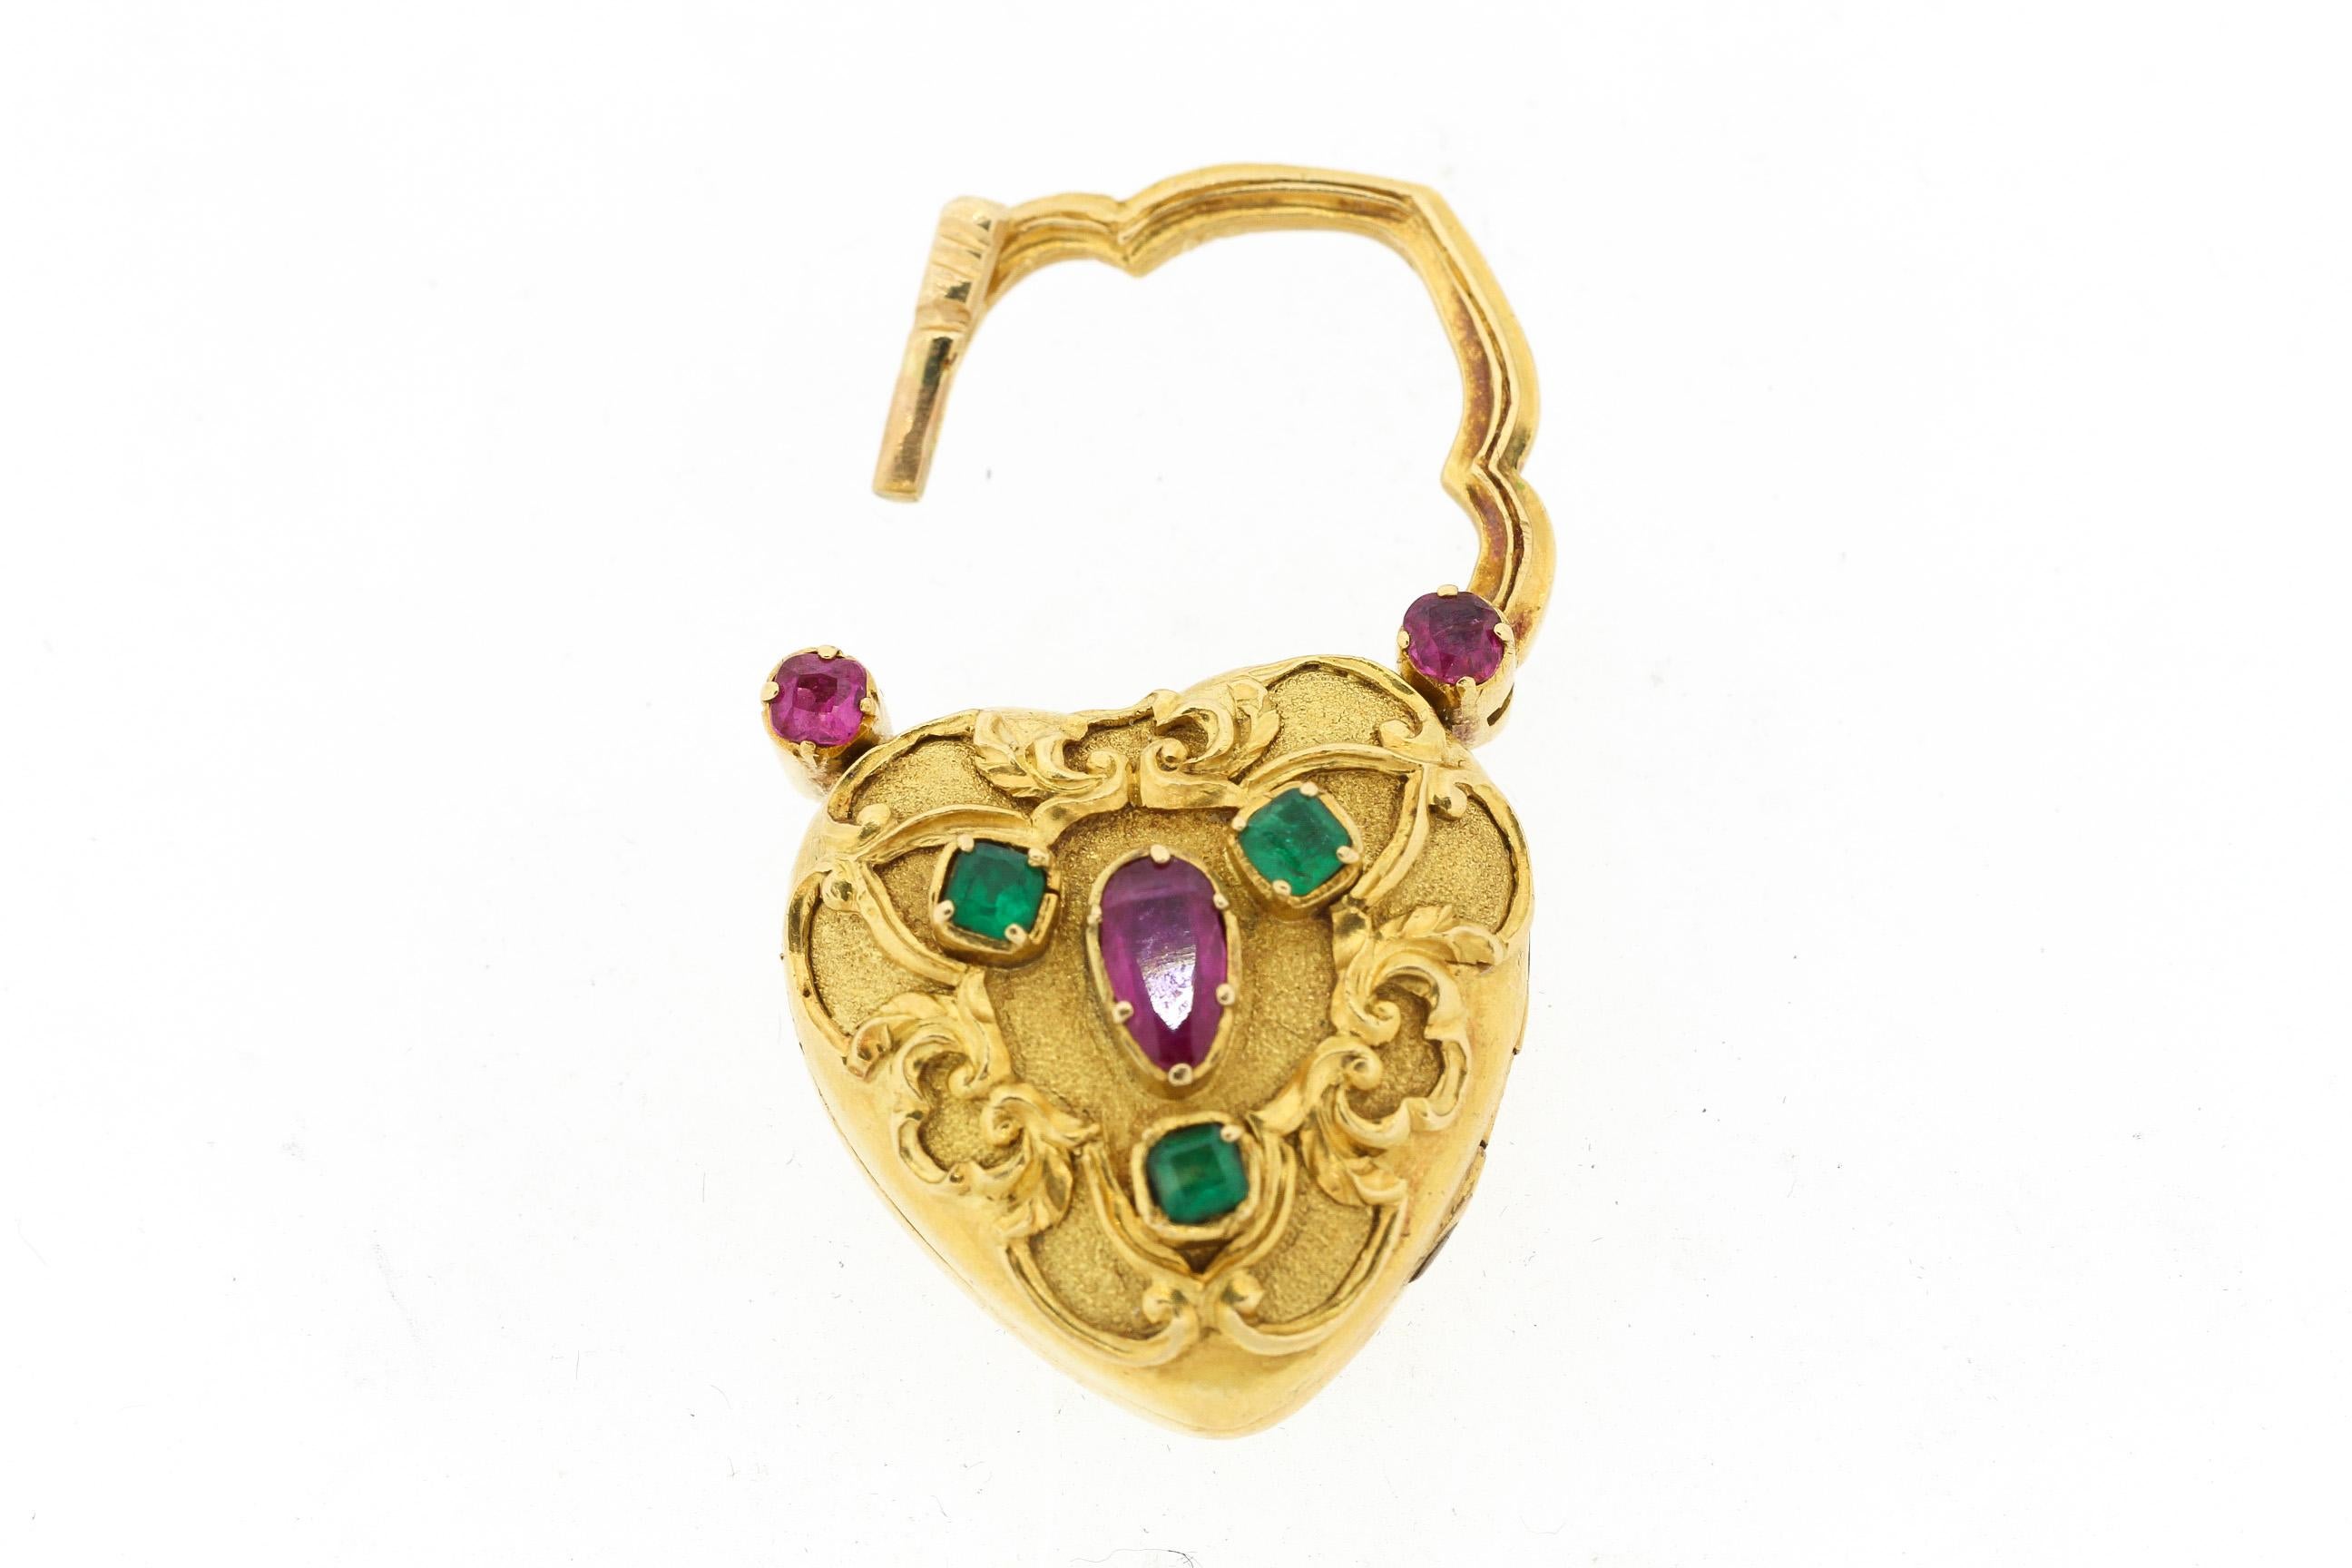 A charming Victorian repousse heart locket with padlock top set with emeralds and rubies, circa 1880. This beautifully rendered padlock locket is made in 18k gold and has high relief scroll work, and bright rubies and emeralds. The inside opens to